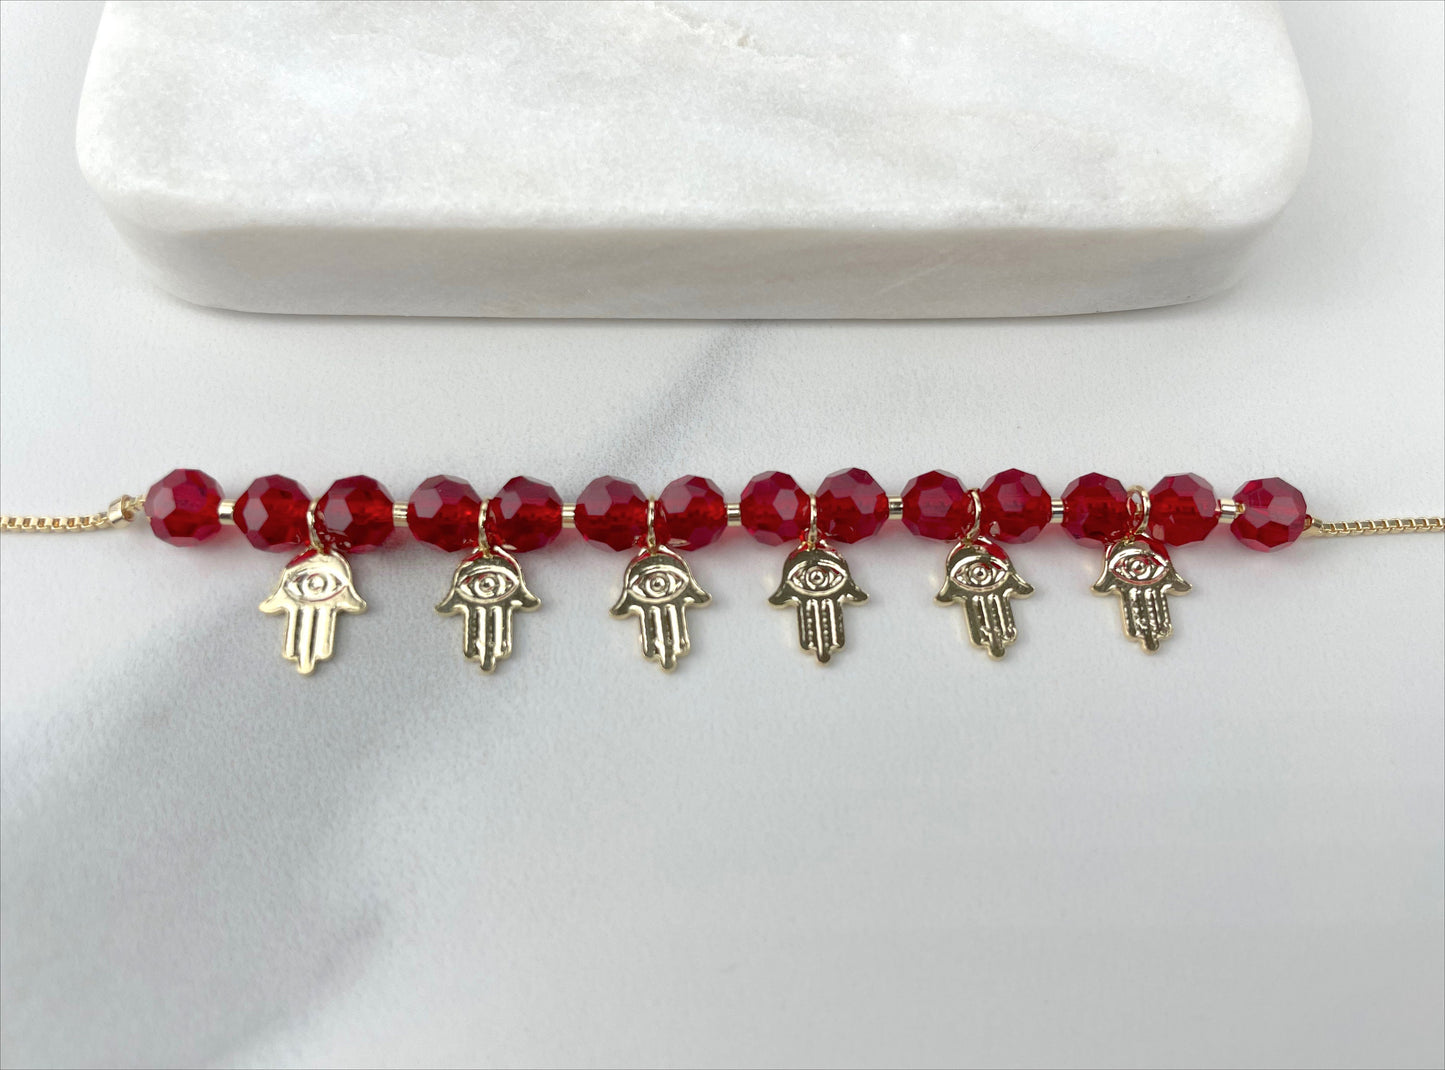 18k Gold Filled 1mm Box Chain, Red Beads, Hamsa Hand Charms Bracelet, Lucky & Protection, Wholesale Jewelry Making Supplies